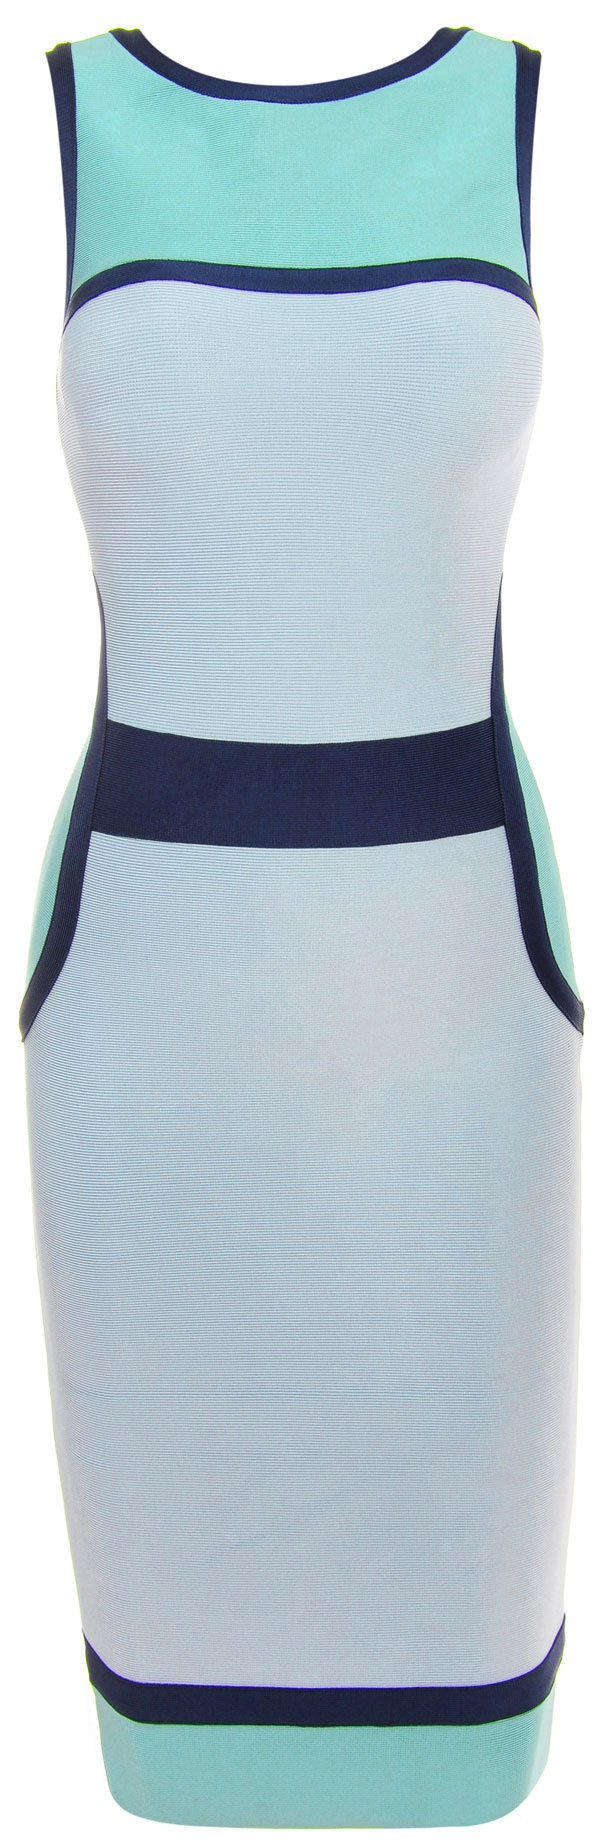 Blue and White Colorblock Pencil Bandage Dress